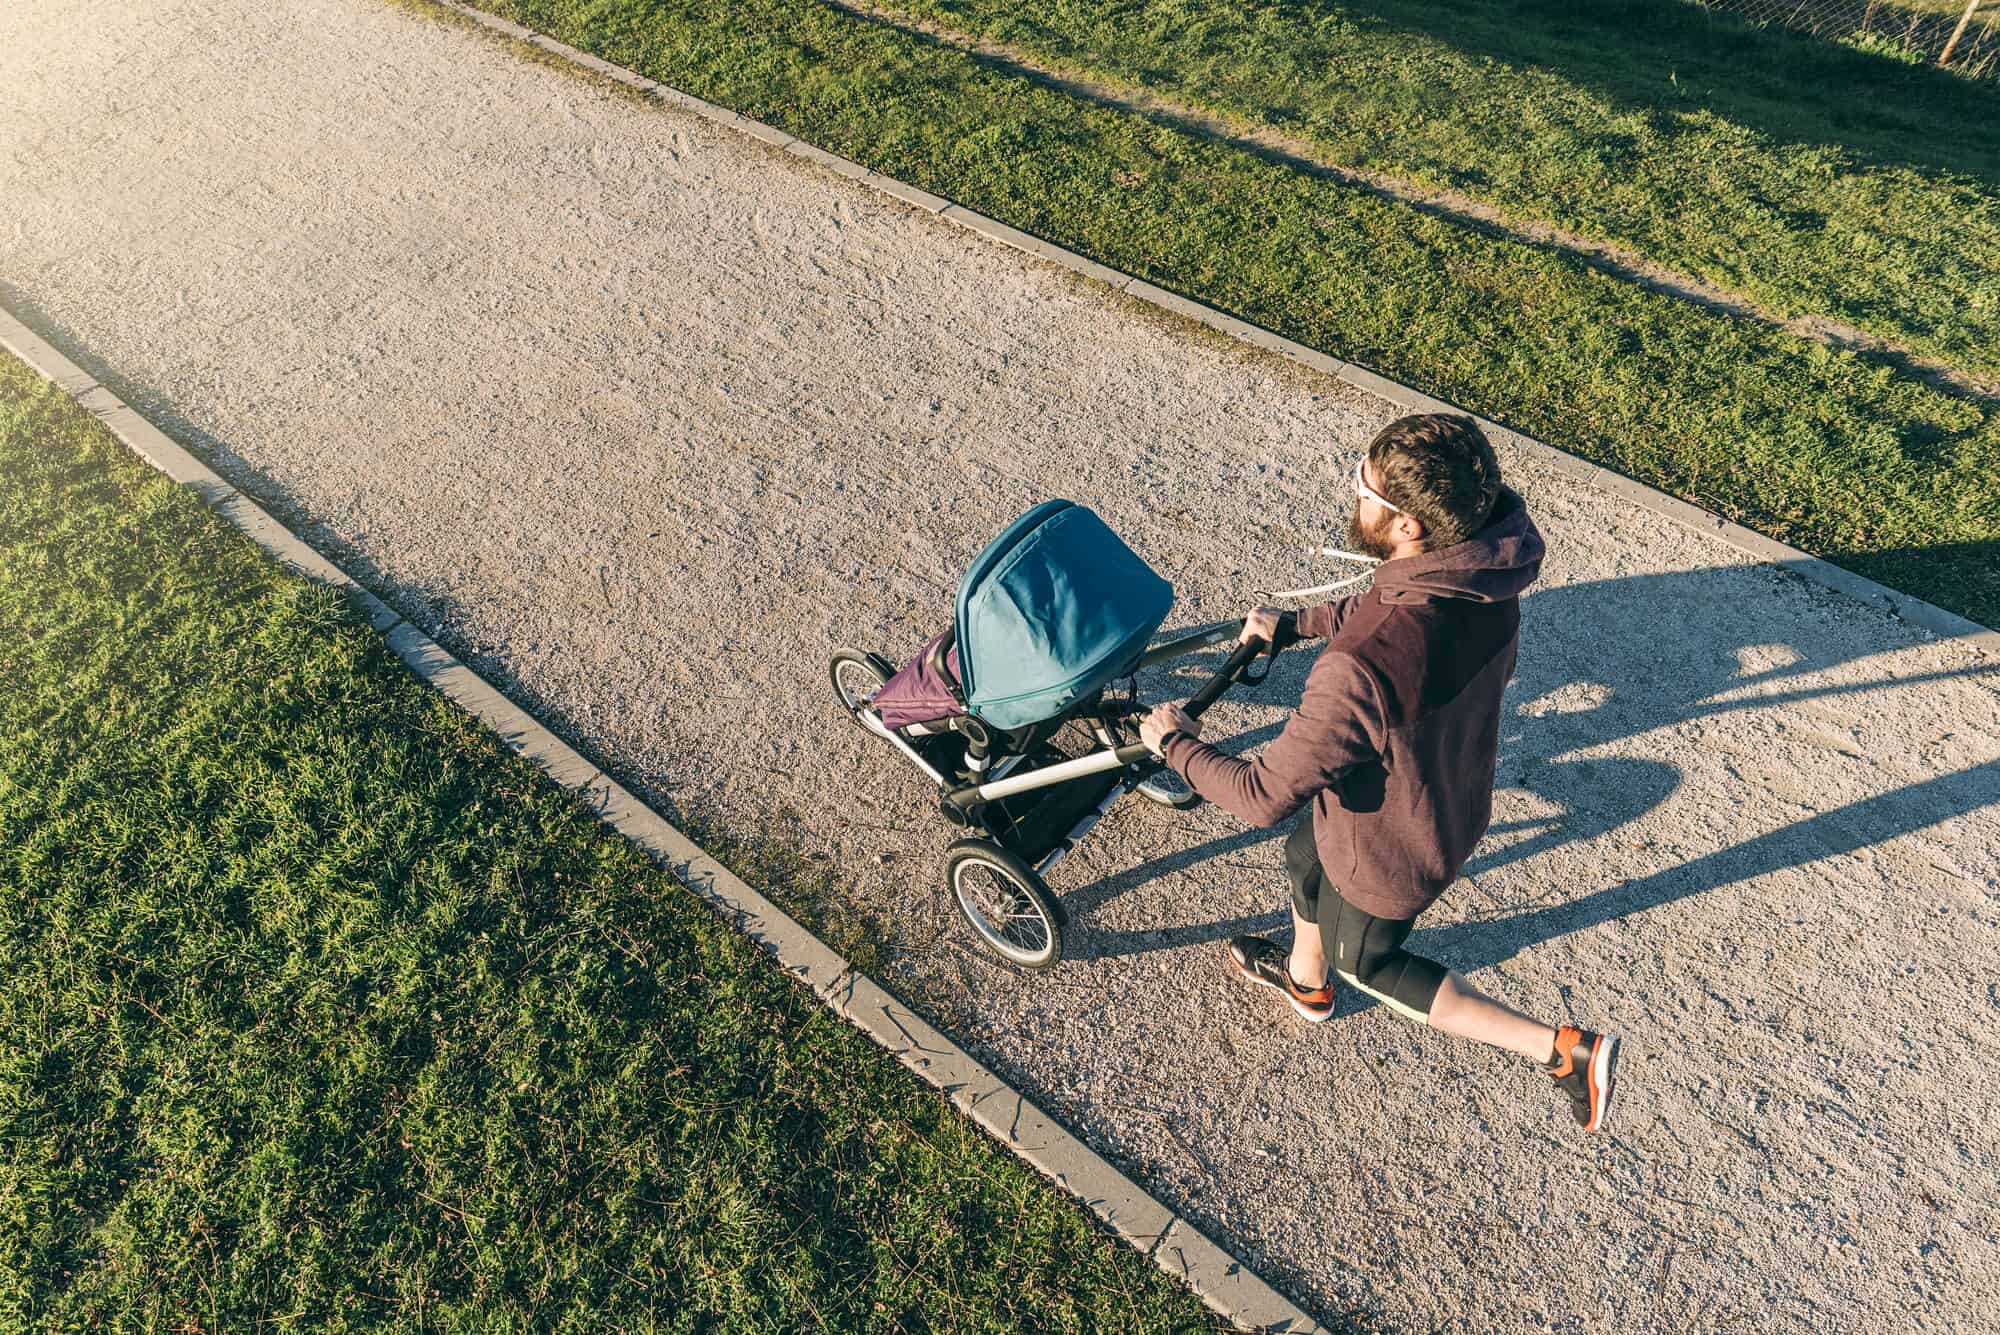 How Many More Calories Does Running With a Stroller Burn: Man Running with a stroller